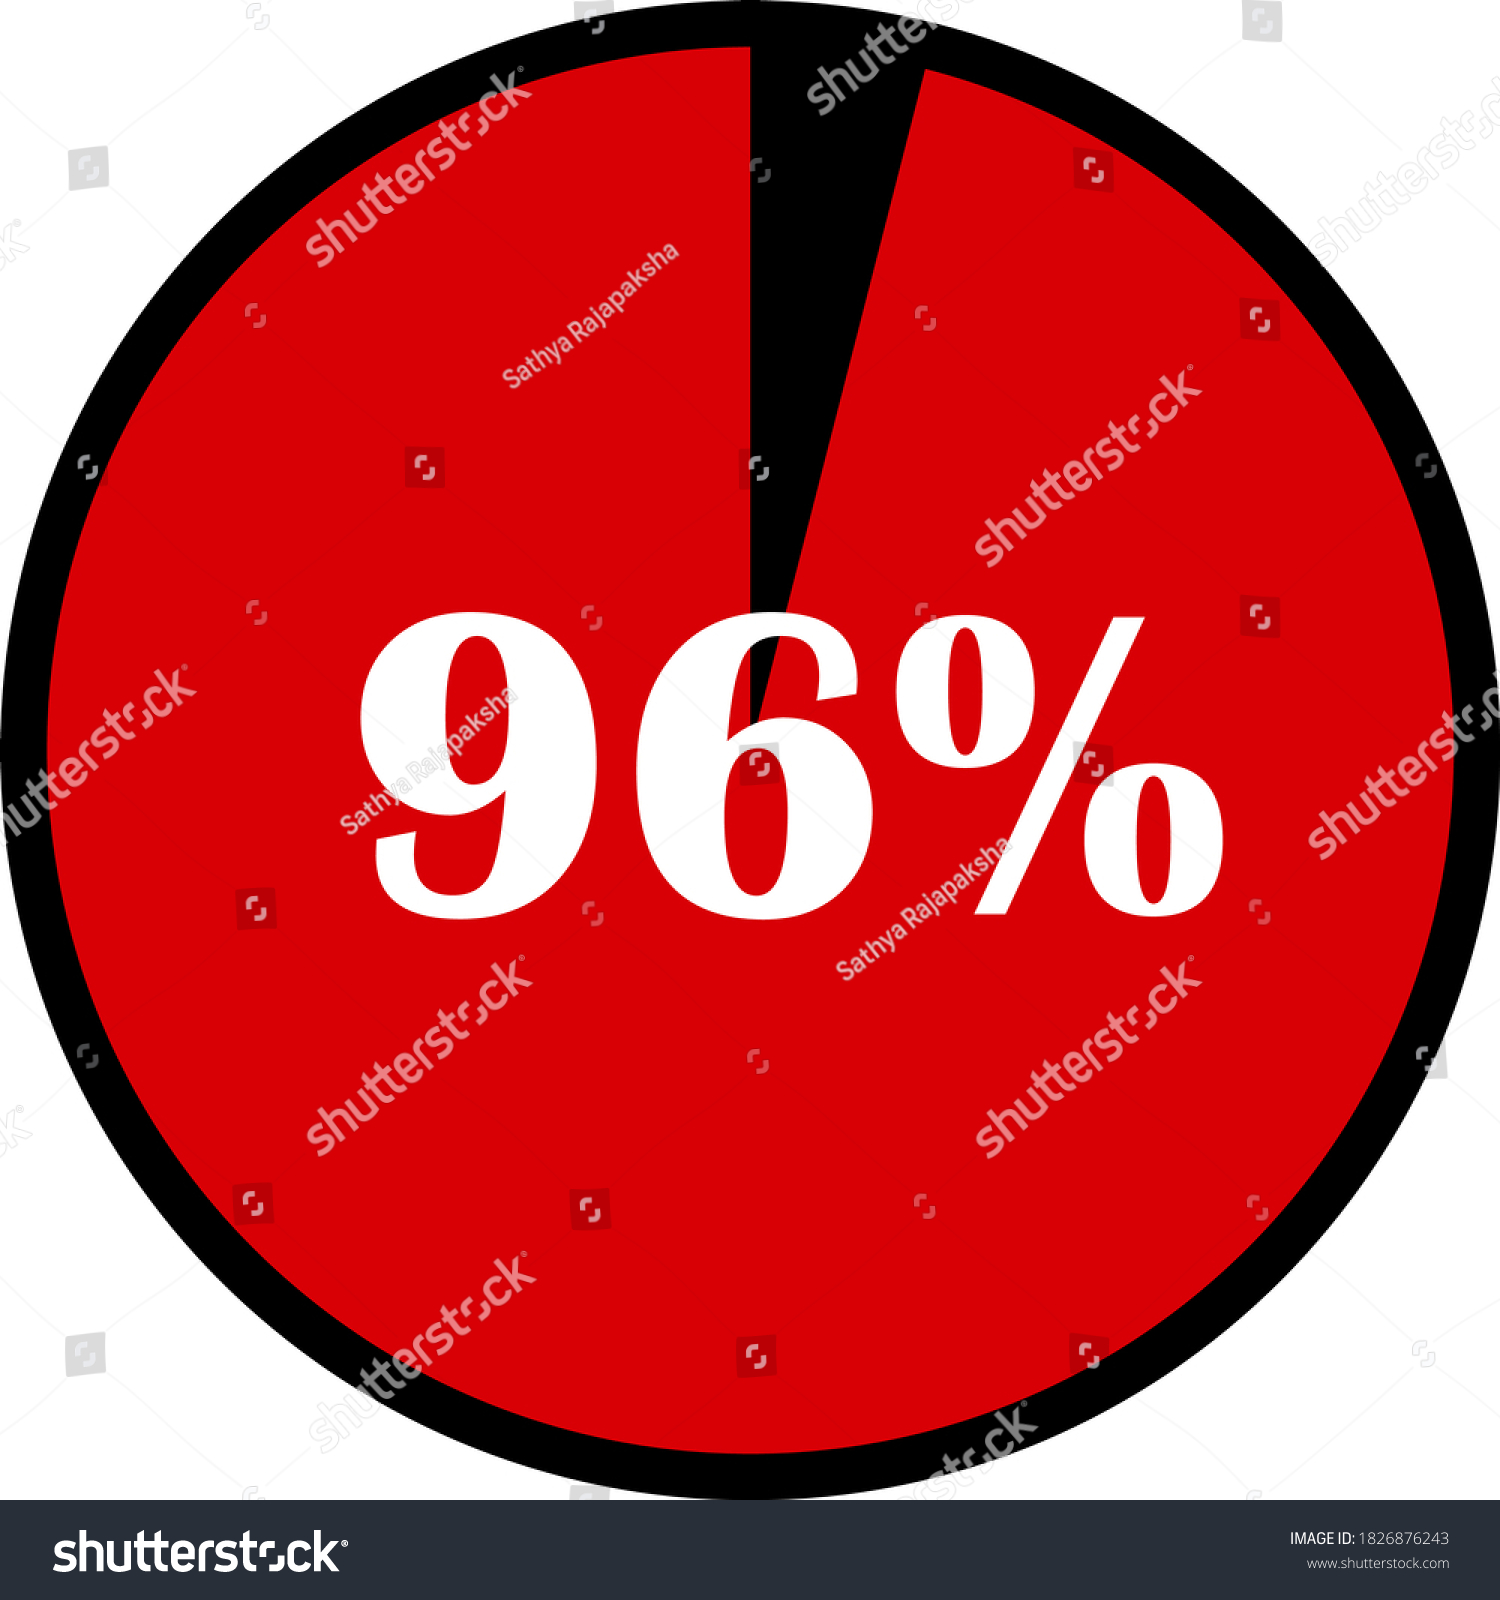 SVG of circle percentage diagrams meter ready-to-use for web design, user interface UI or infographic - indicator with red & black showing 96% svg